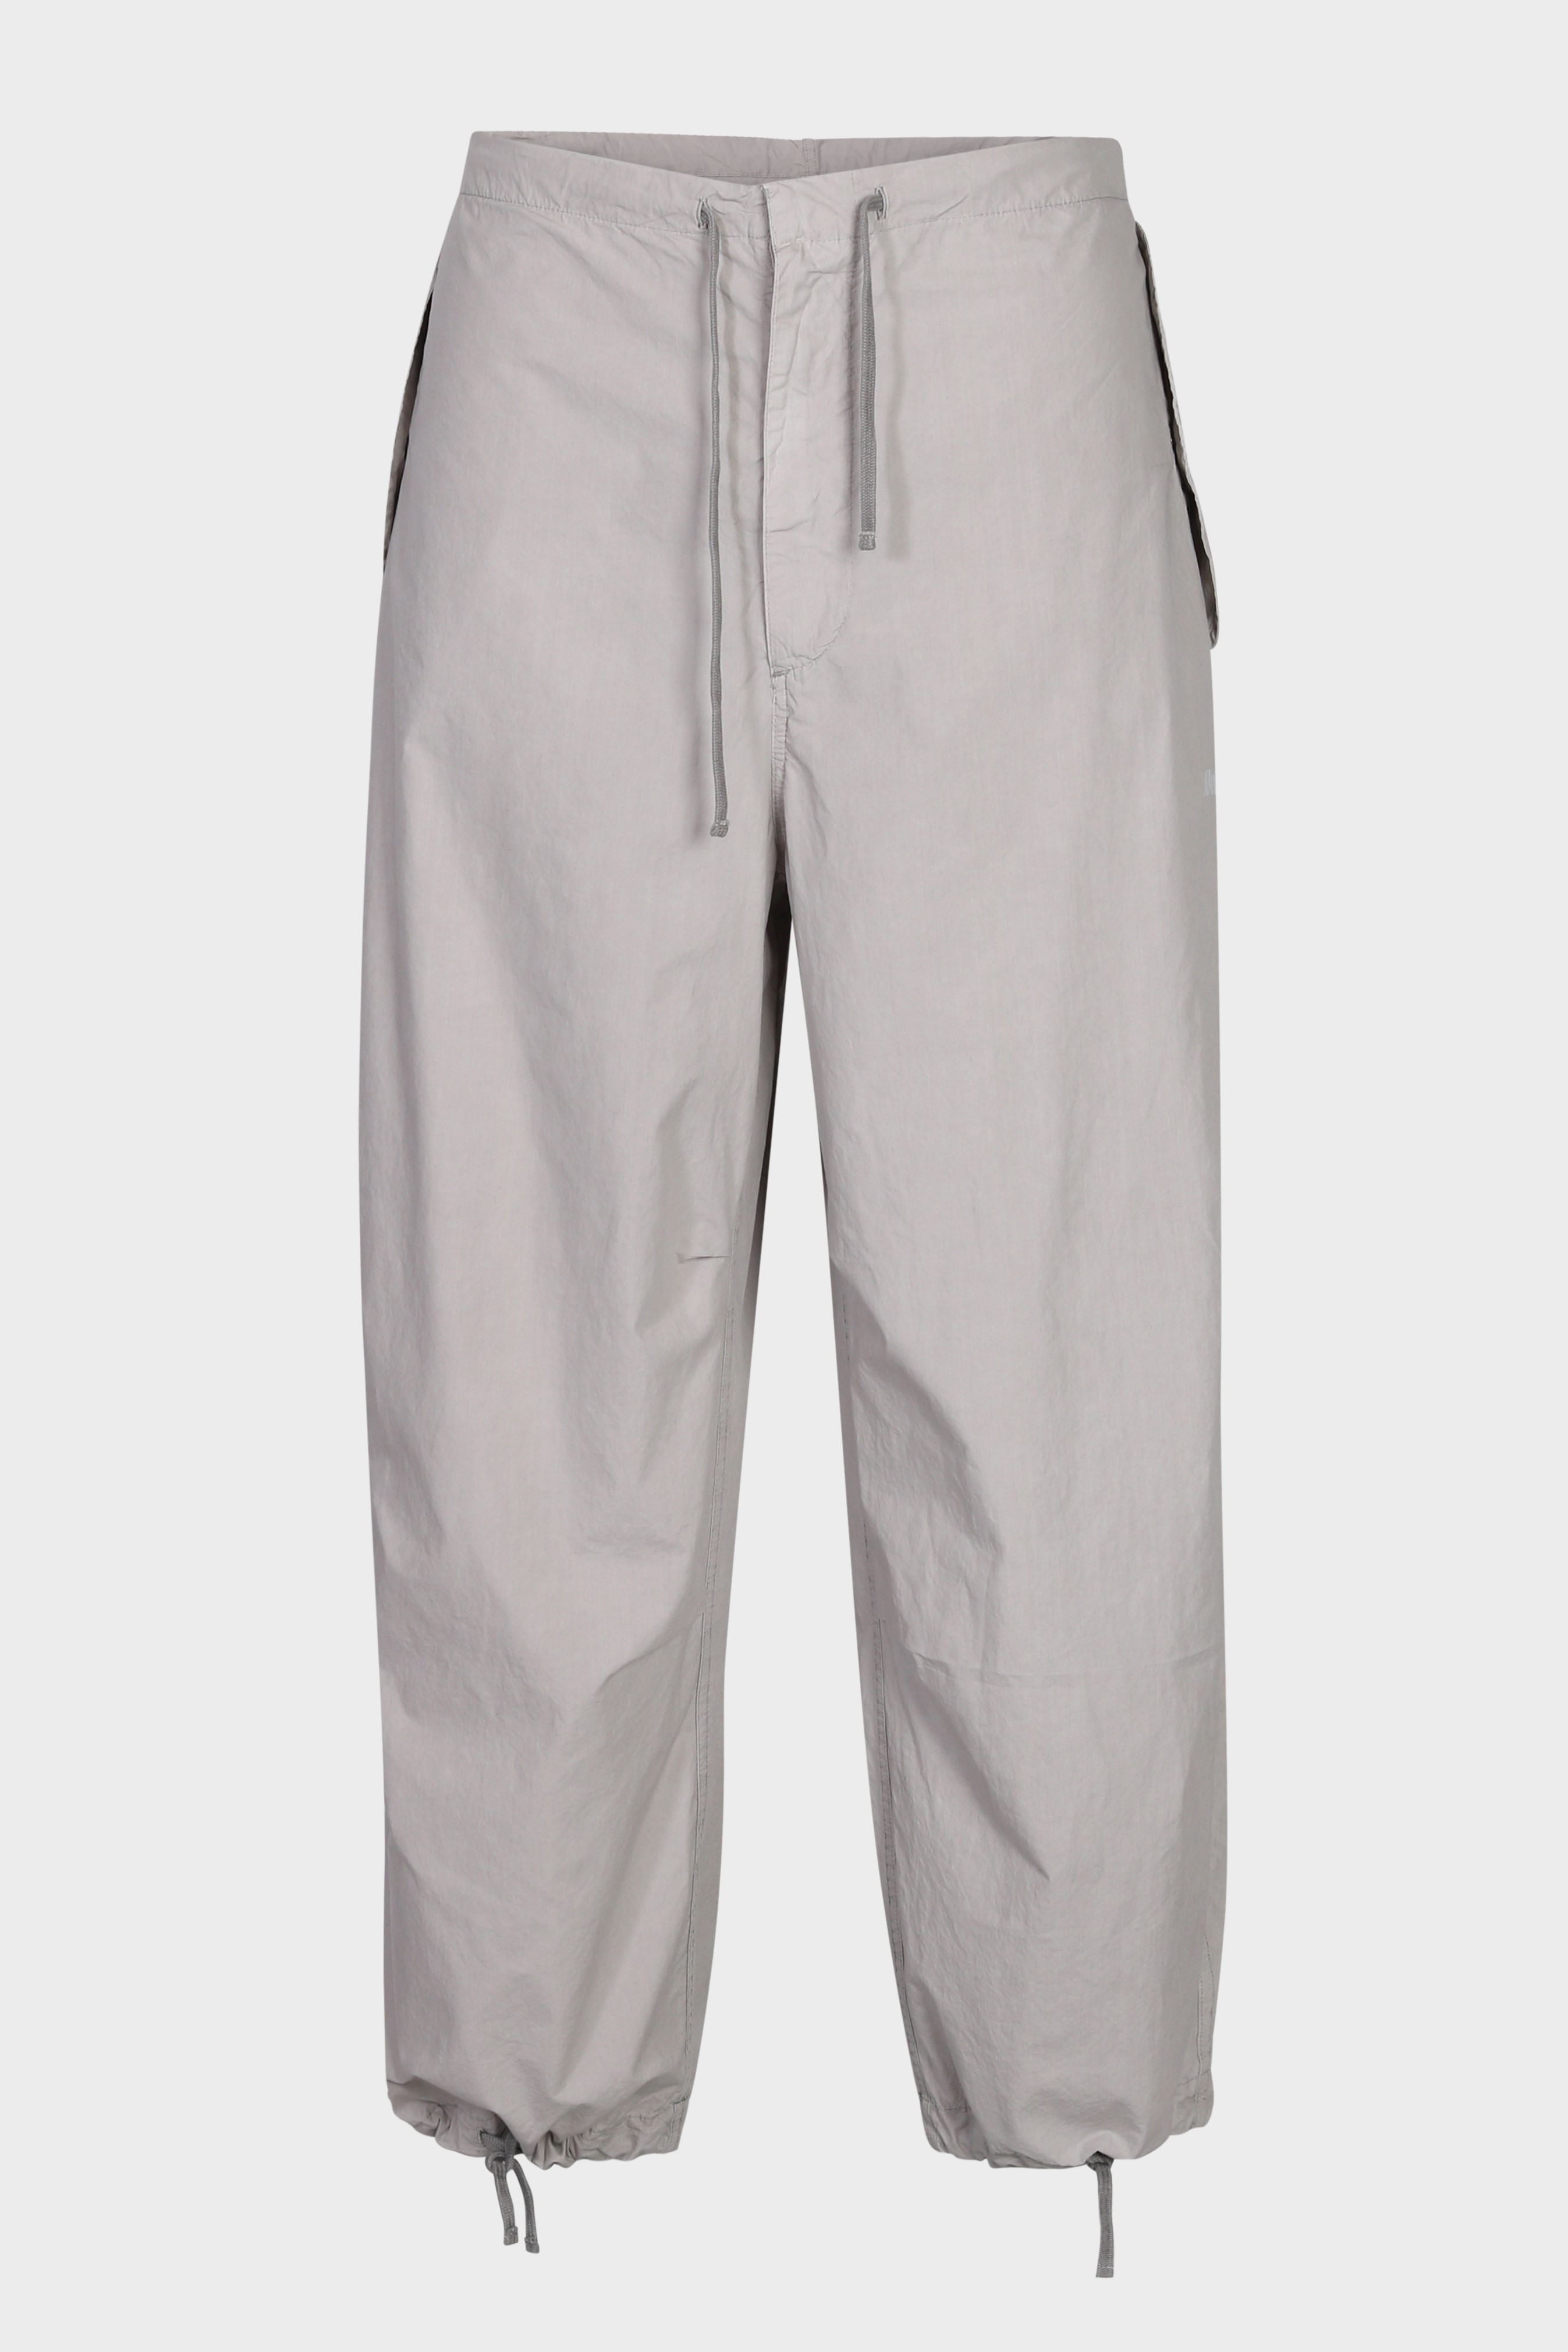 AUTRY ACTION PEOPLE Track Pant in Grey